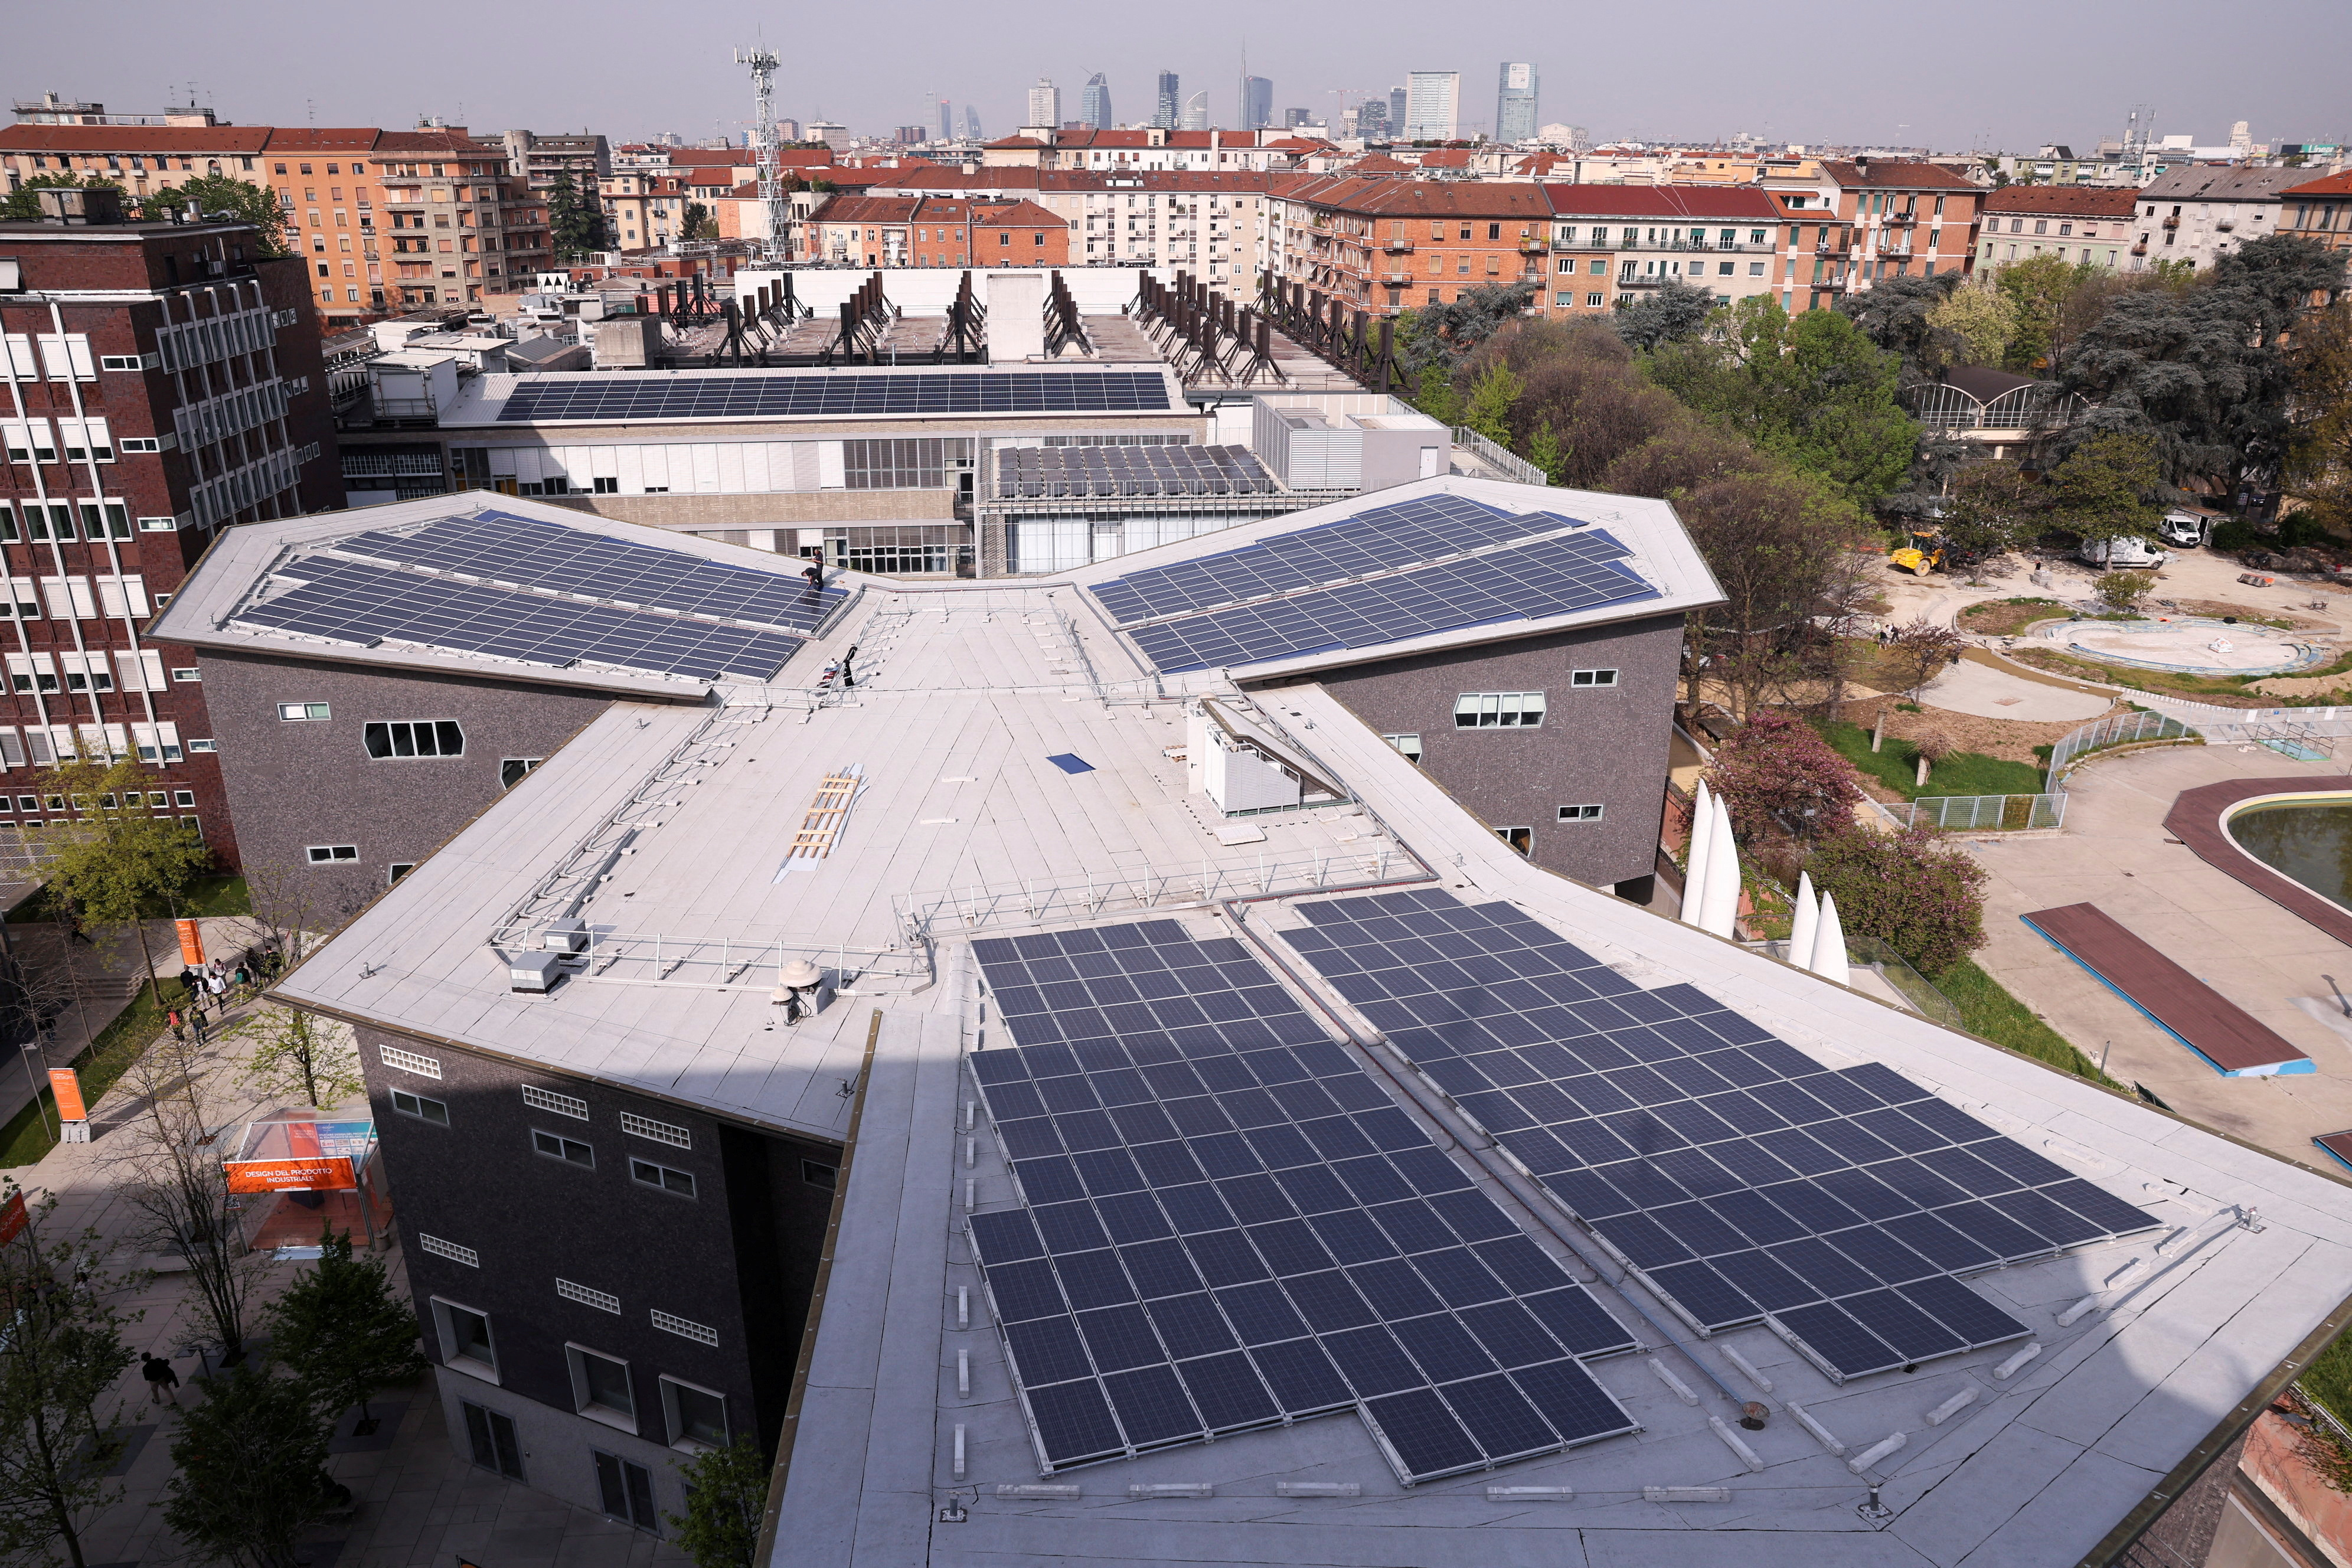 A solar panels array, part of the renewable energy community of Politecnico di Milano is seen in Milan